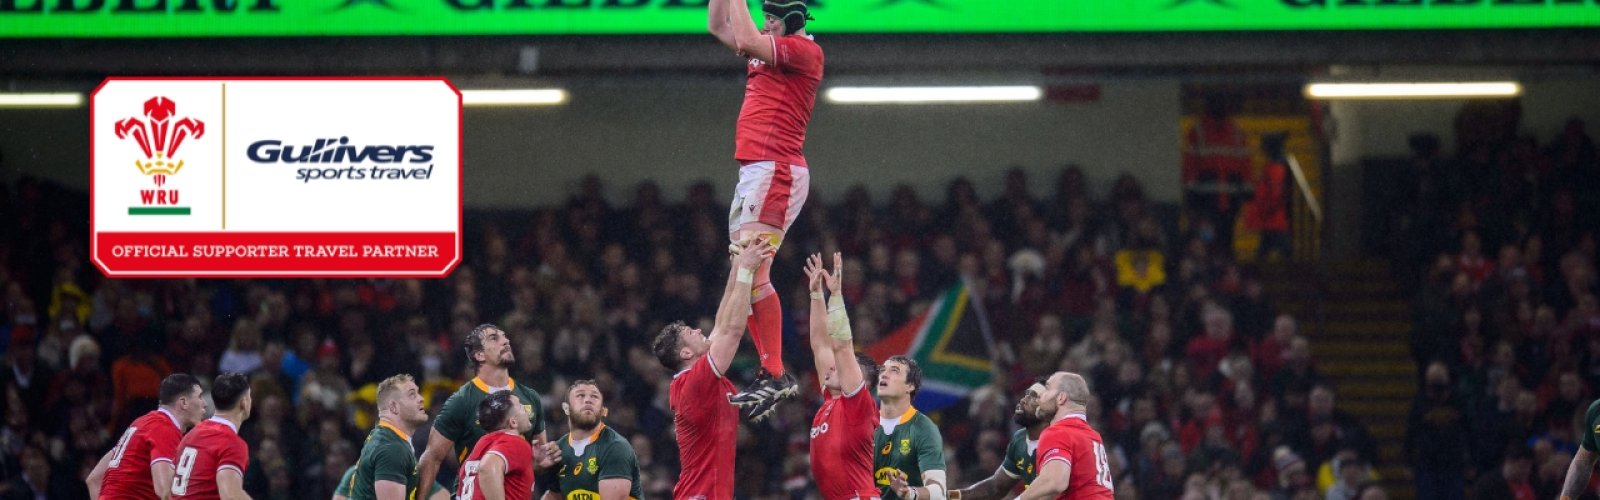 South Africa v Wales 2024 ticket packages for the Test match at Twickenham